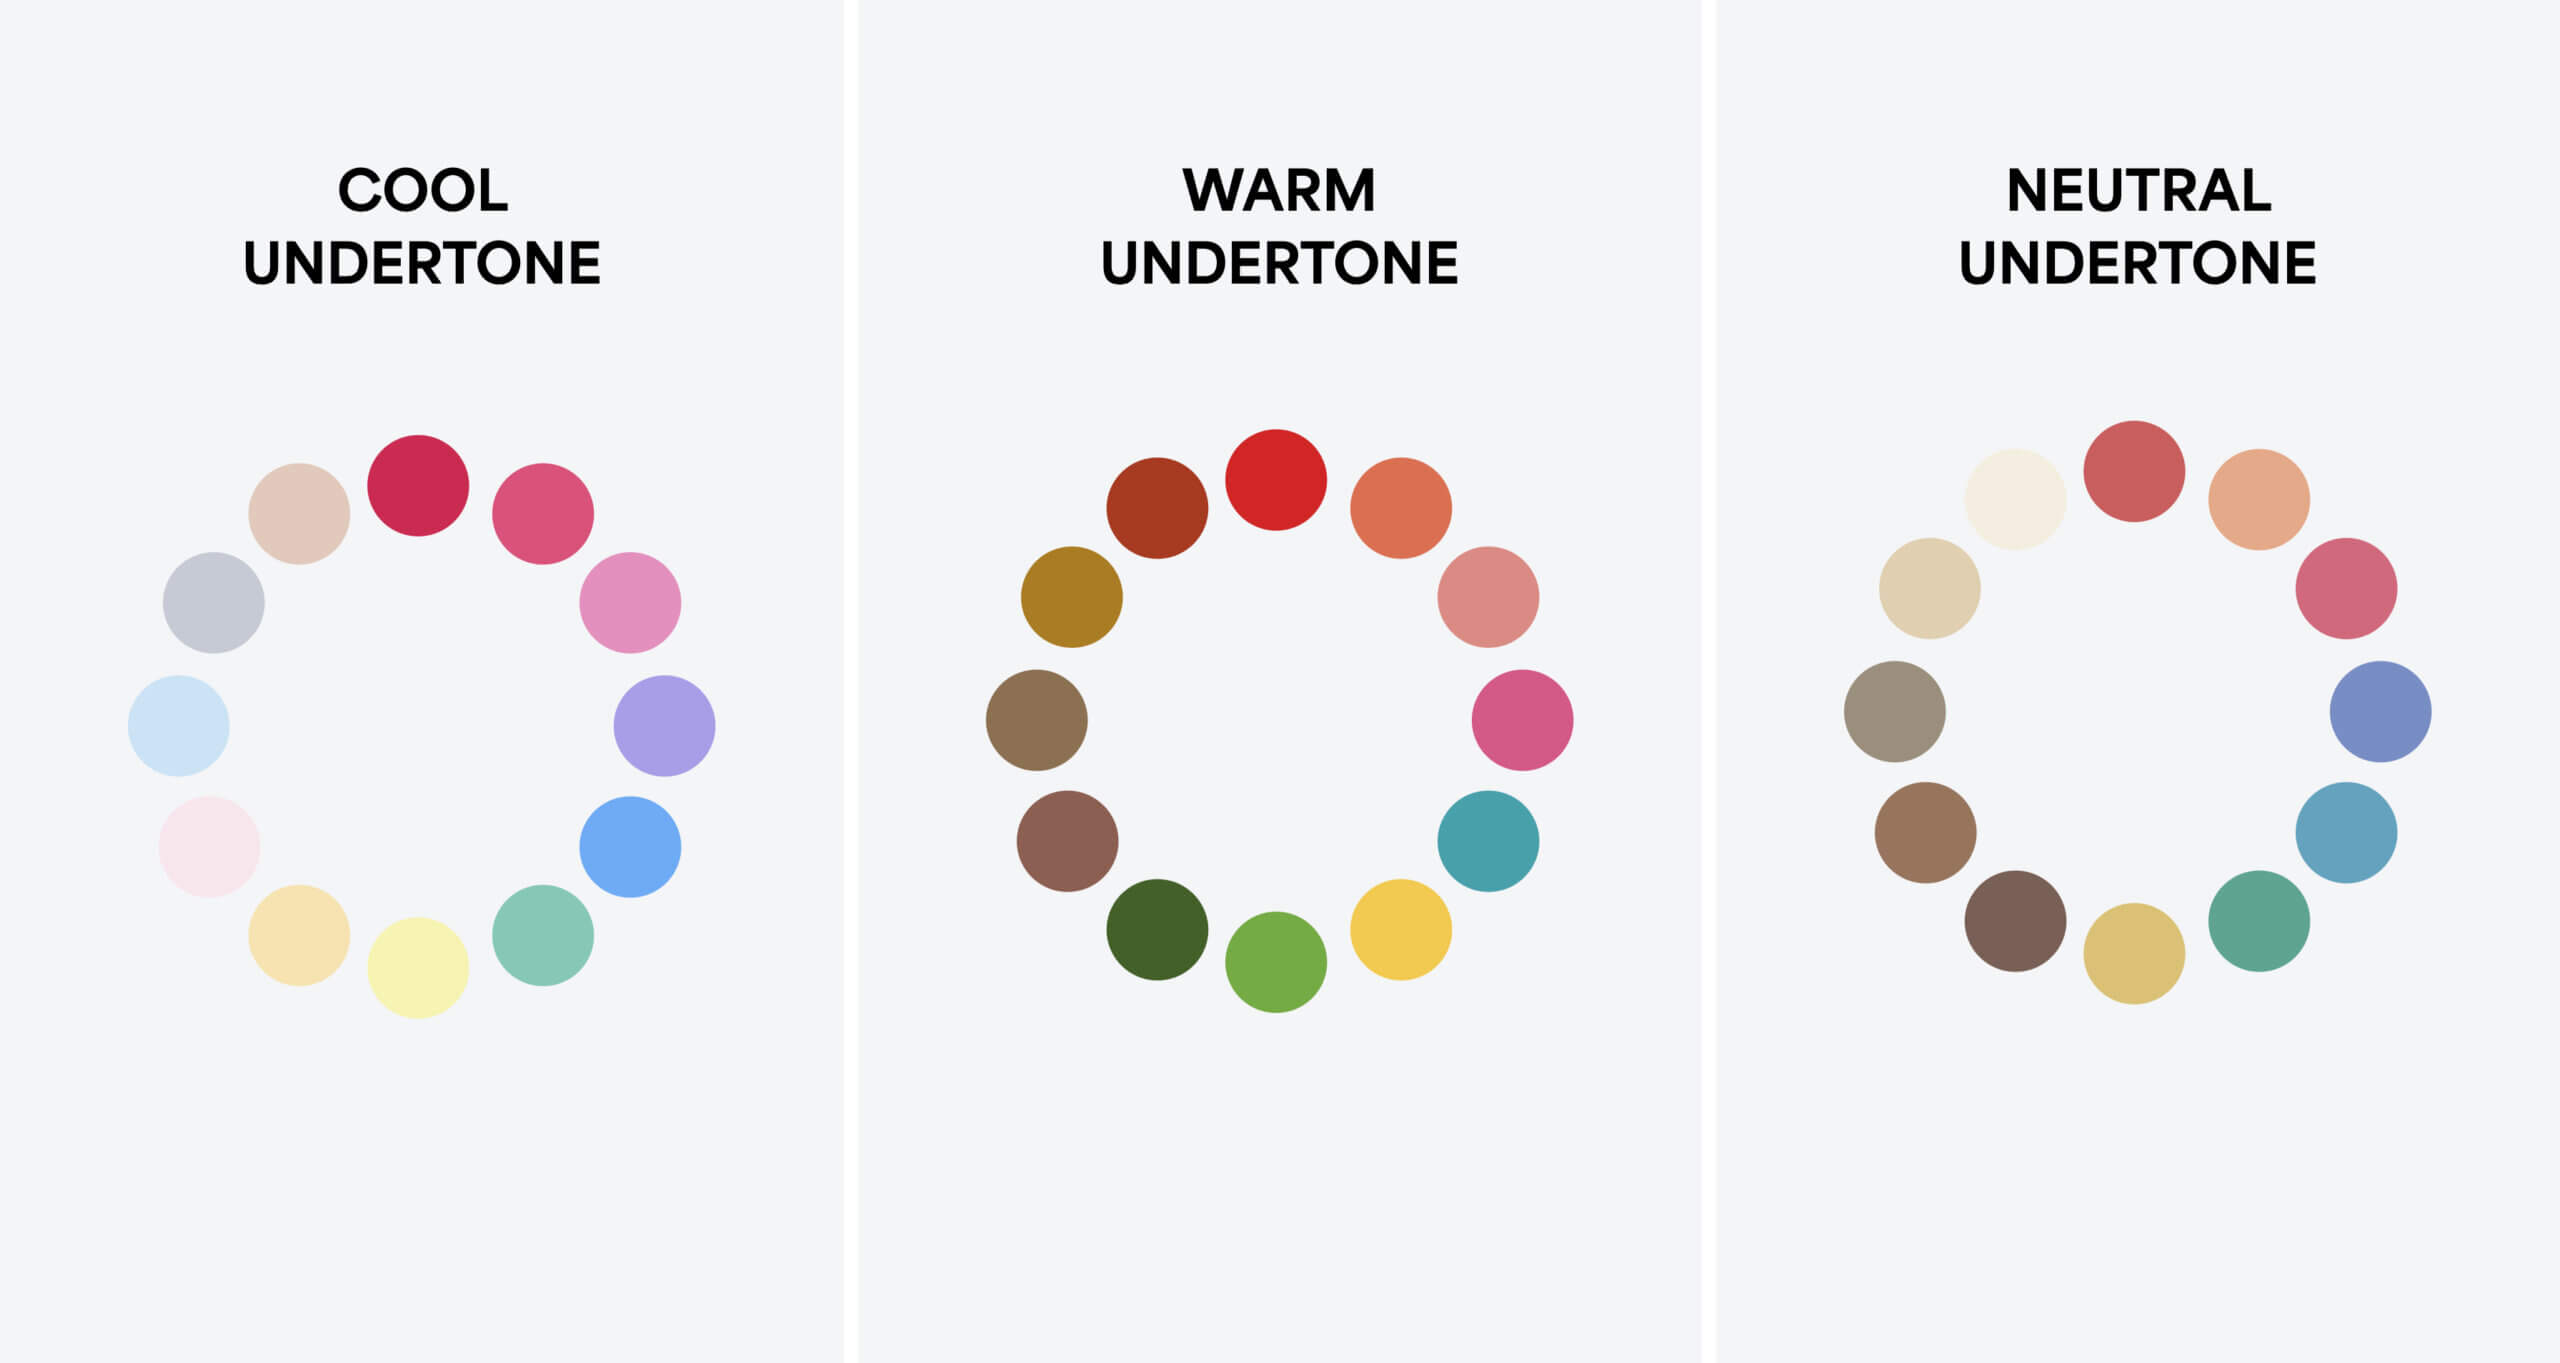 color wheel for cool, neutral, and warm undertones for the skin